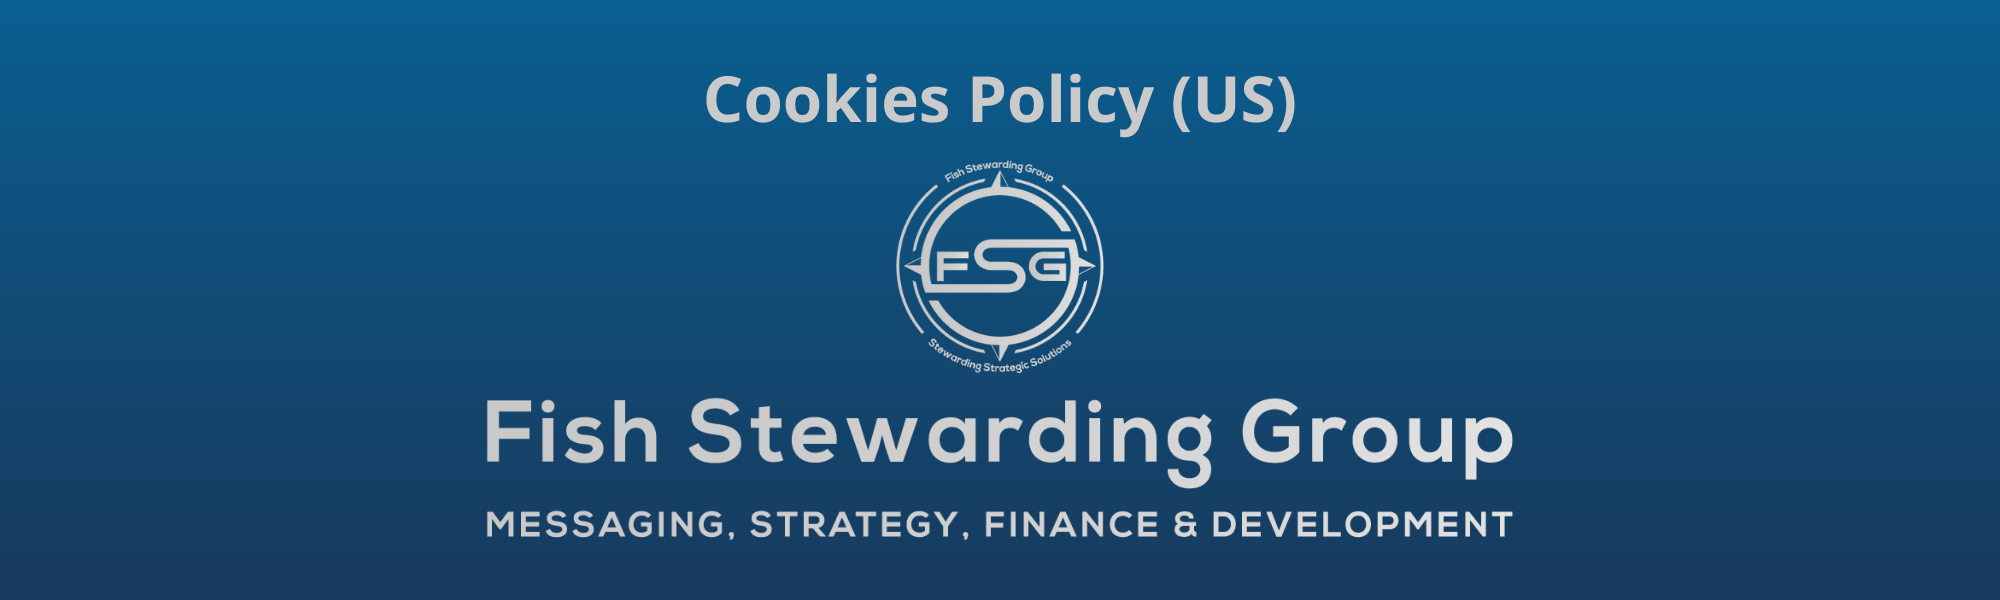 A thin rectangular Footer graphic for the Cookies Policy (US) page. The background is a blue gradient color that goes from a dark blue on the bottom to a lighter blue on top. The text in gray on top reads Cookies Policy (US) and FAQs. The text in gray on the bottom center reads: Fish Stewarding Group and beneath that, the text reads Messaging, Strategy, Finance and Development. In the center above the text is the FSG logo in gray. The logo has the letters FSG in the middle with a circle with four pointed arrows facing north, south, east and west with the S connected to that circle. Four rounded lines make the next circle of the circle and the last layer is a thin circle with the text on the Bottom that reads Stewarding Strategist Solutions and on top, the text reads Fish Stewarding Group.